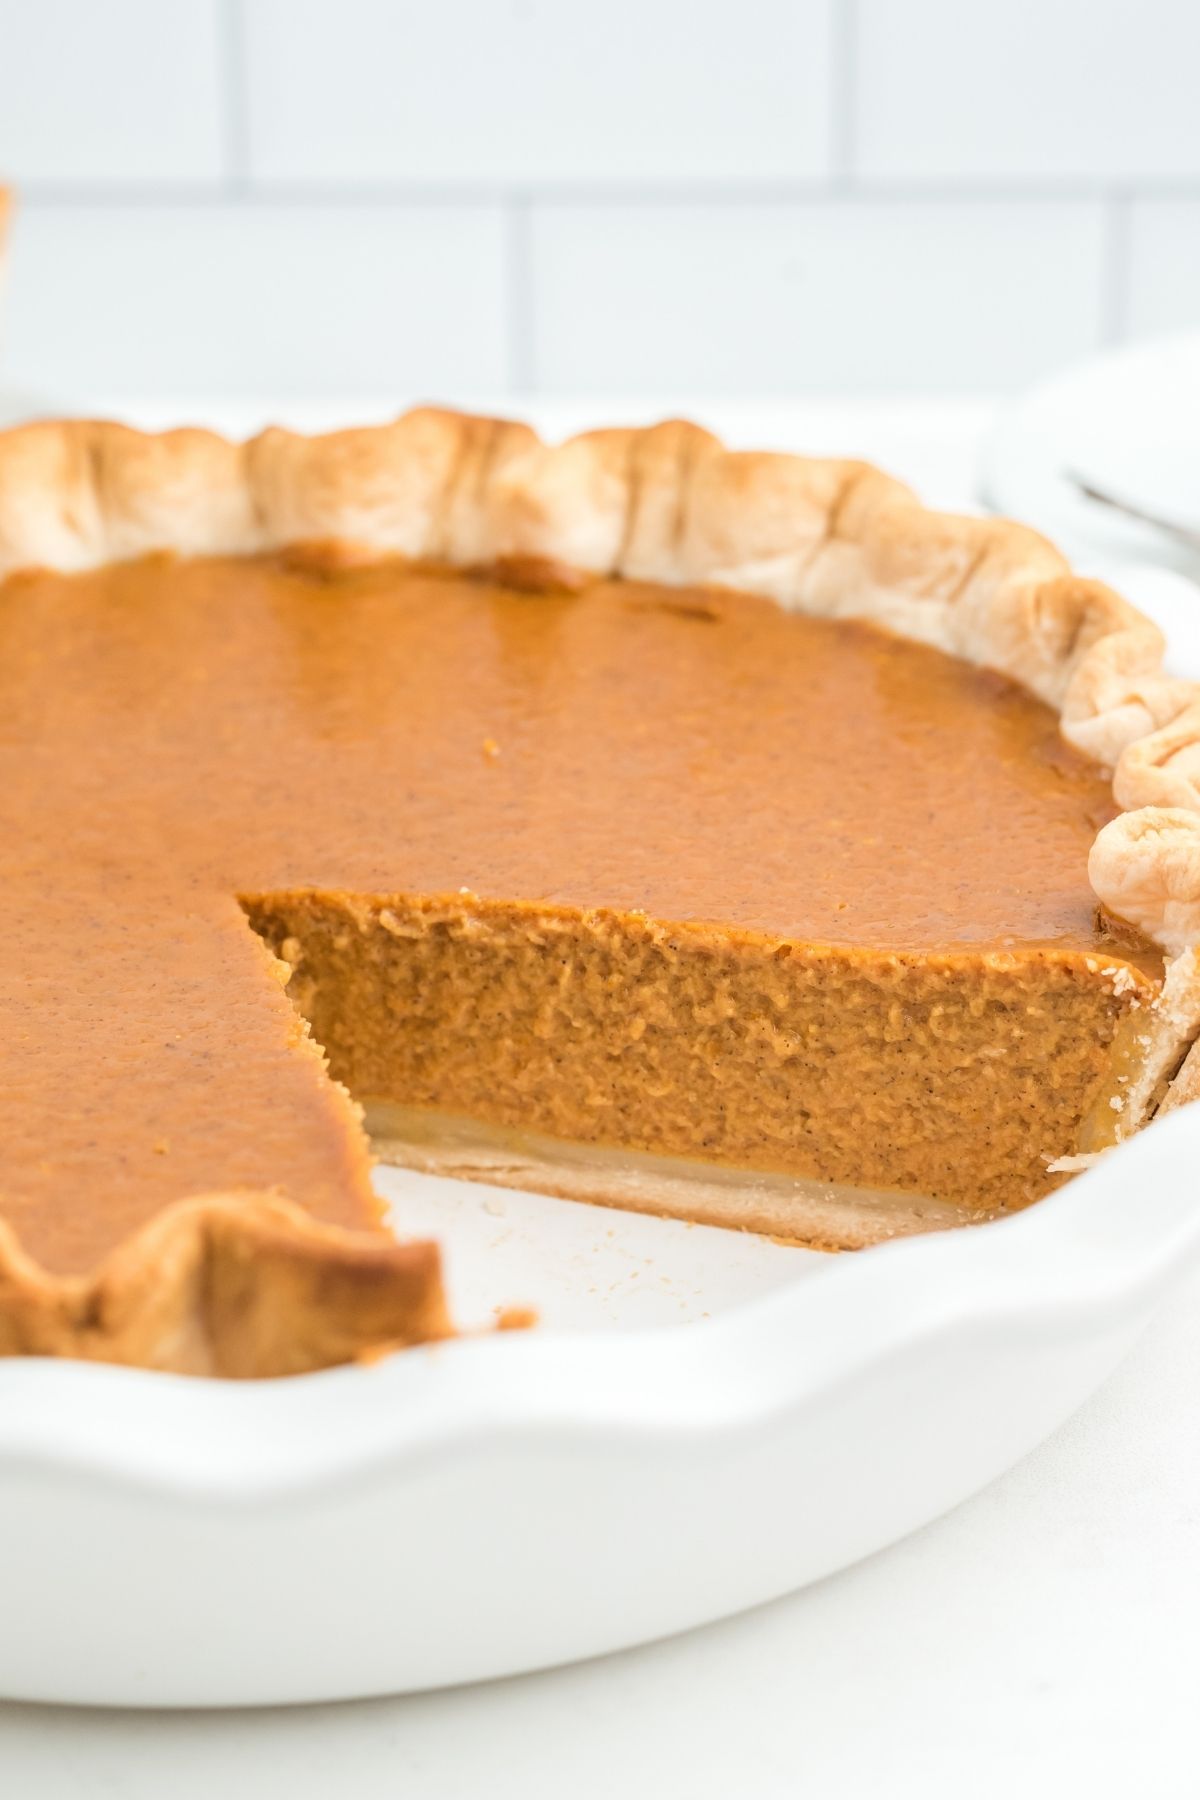 whole pumpkin pie with a slice cut out showing a thick pumpkin filling inside